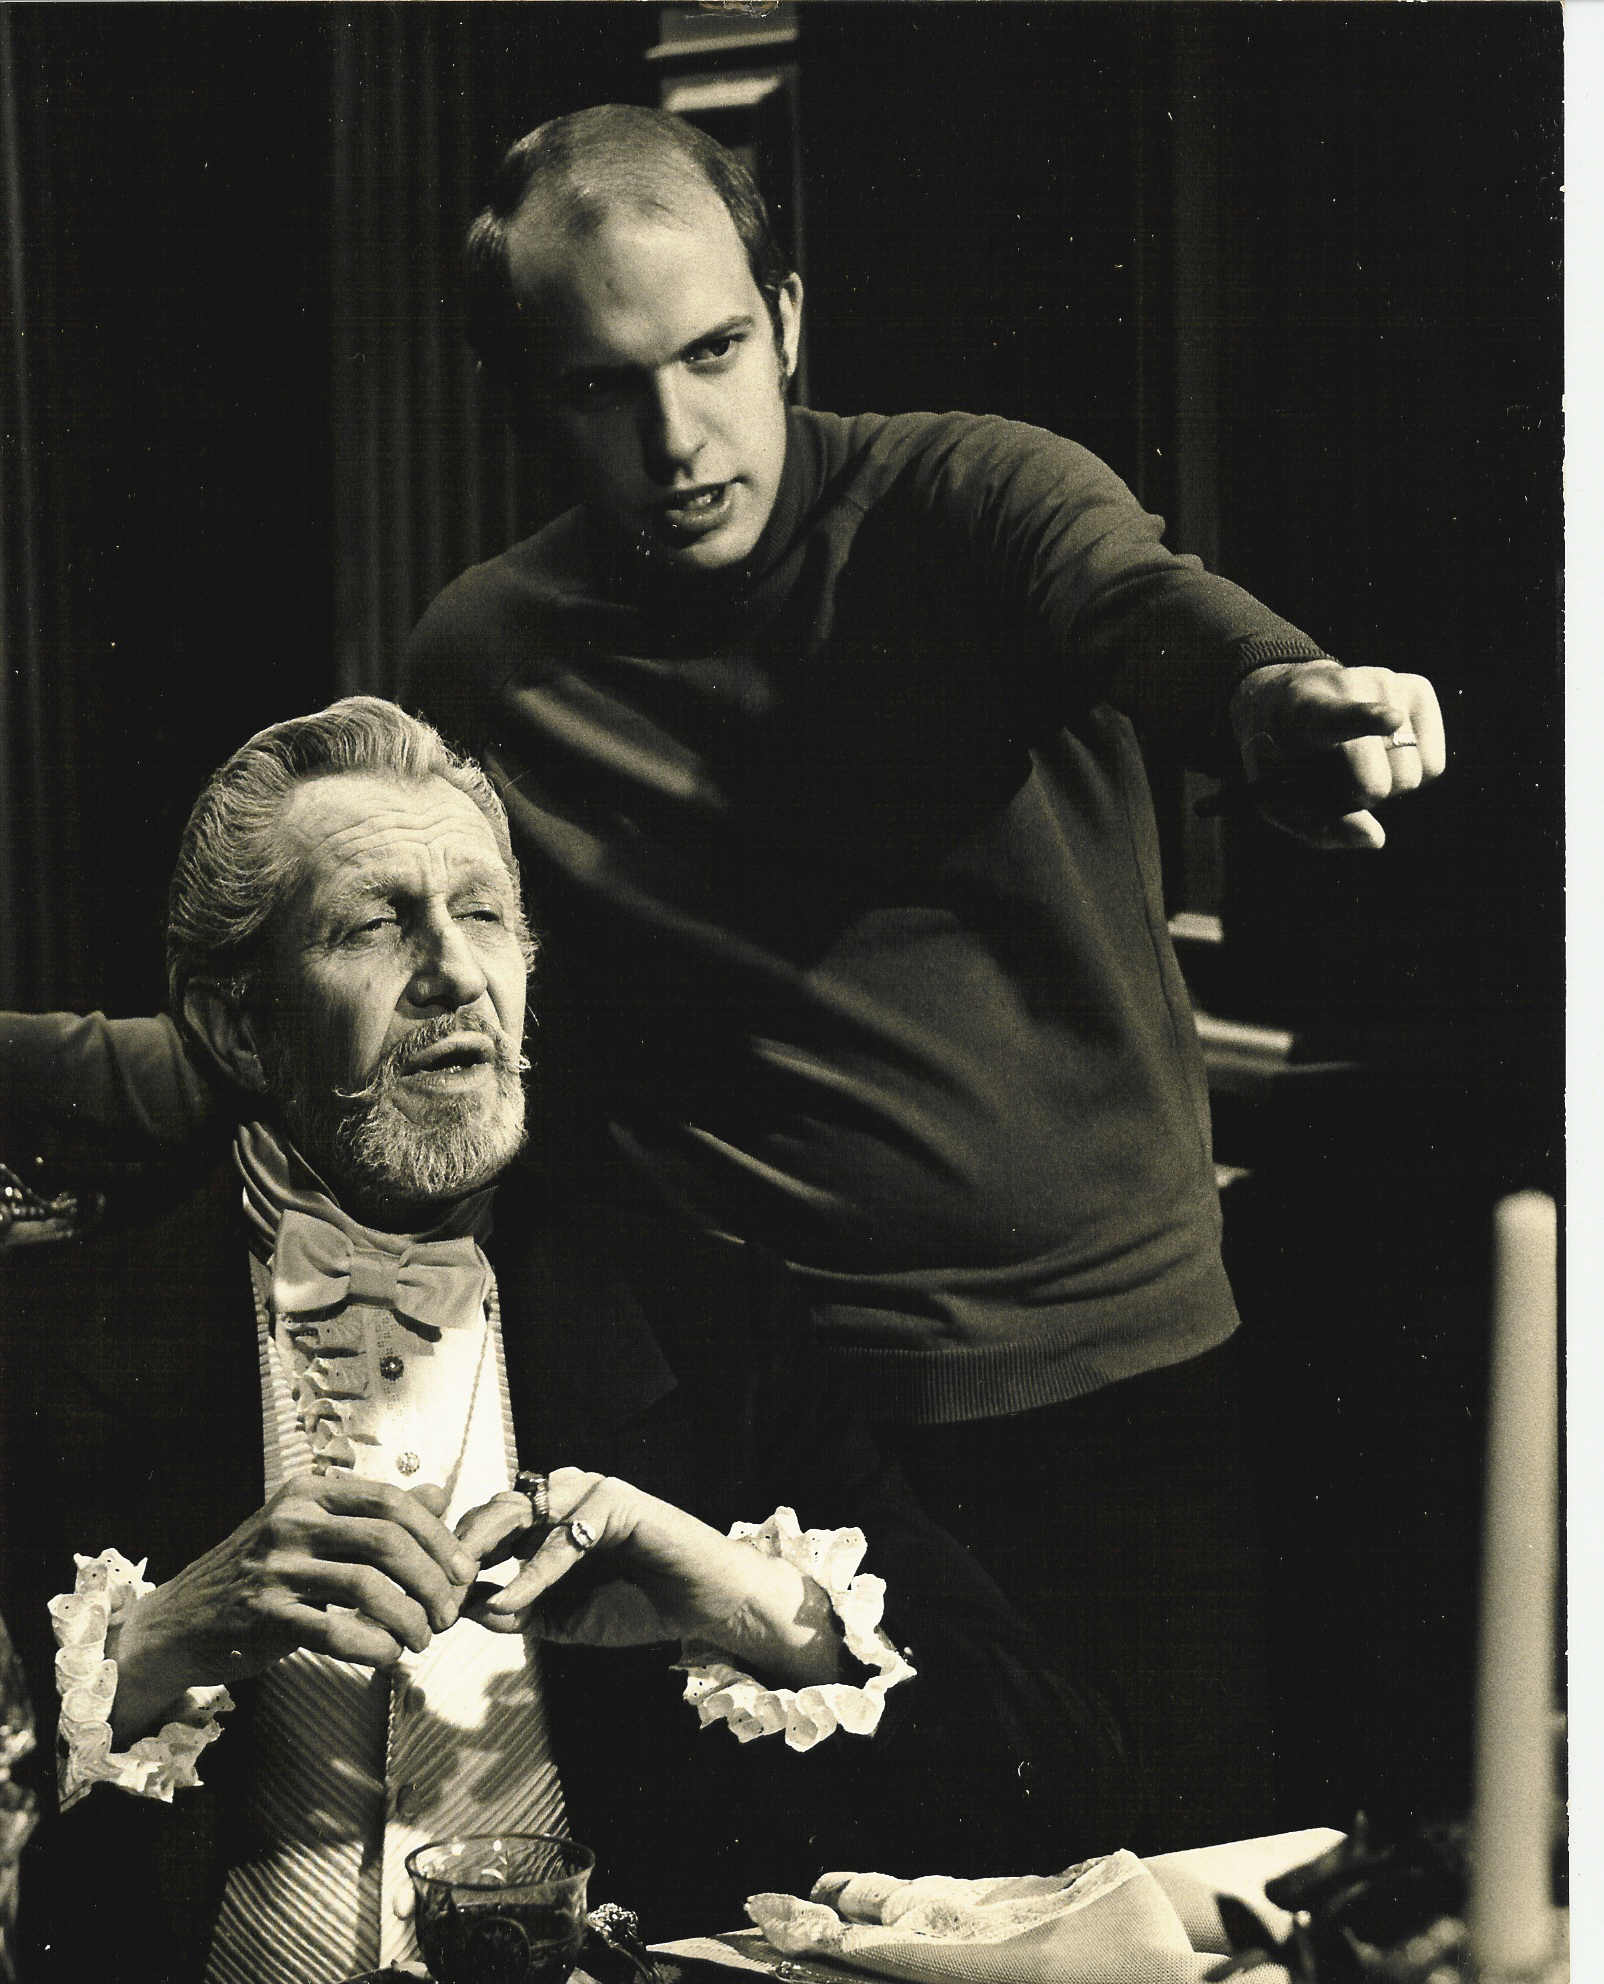 With Vincent Price doing Edgar Allan Poe